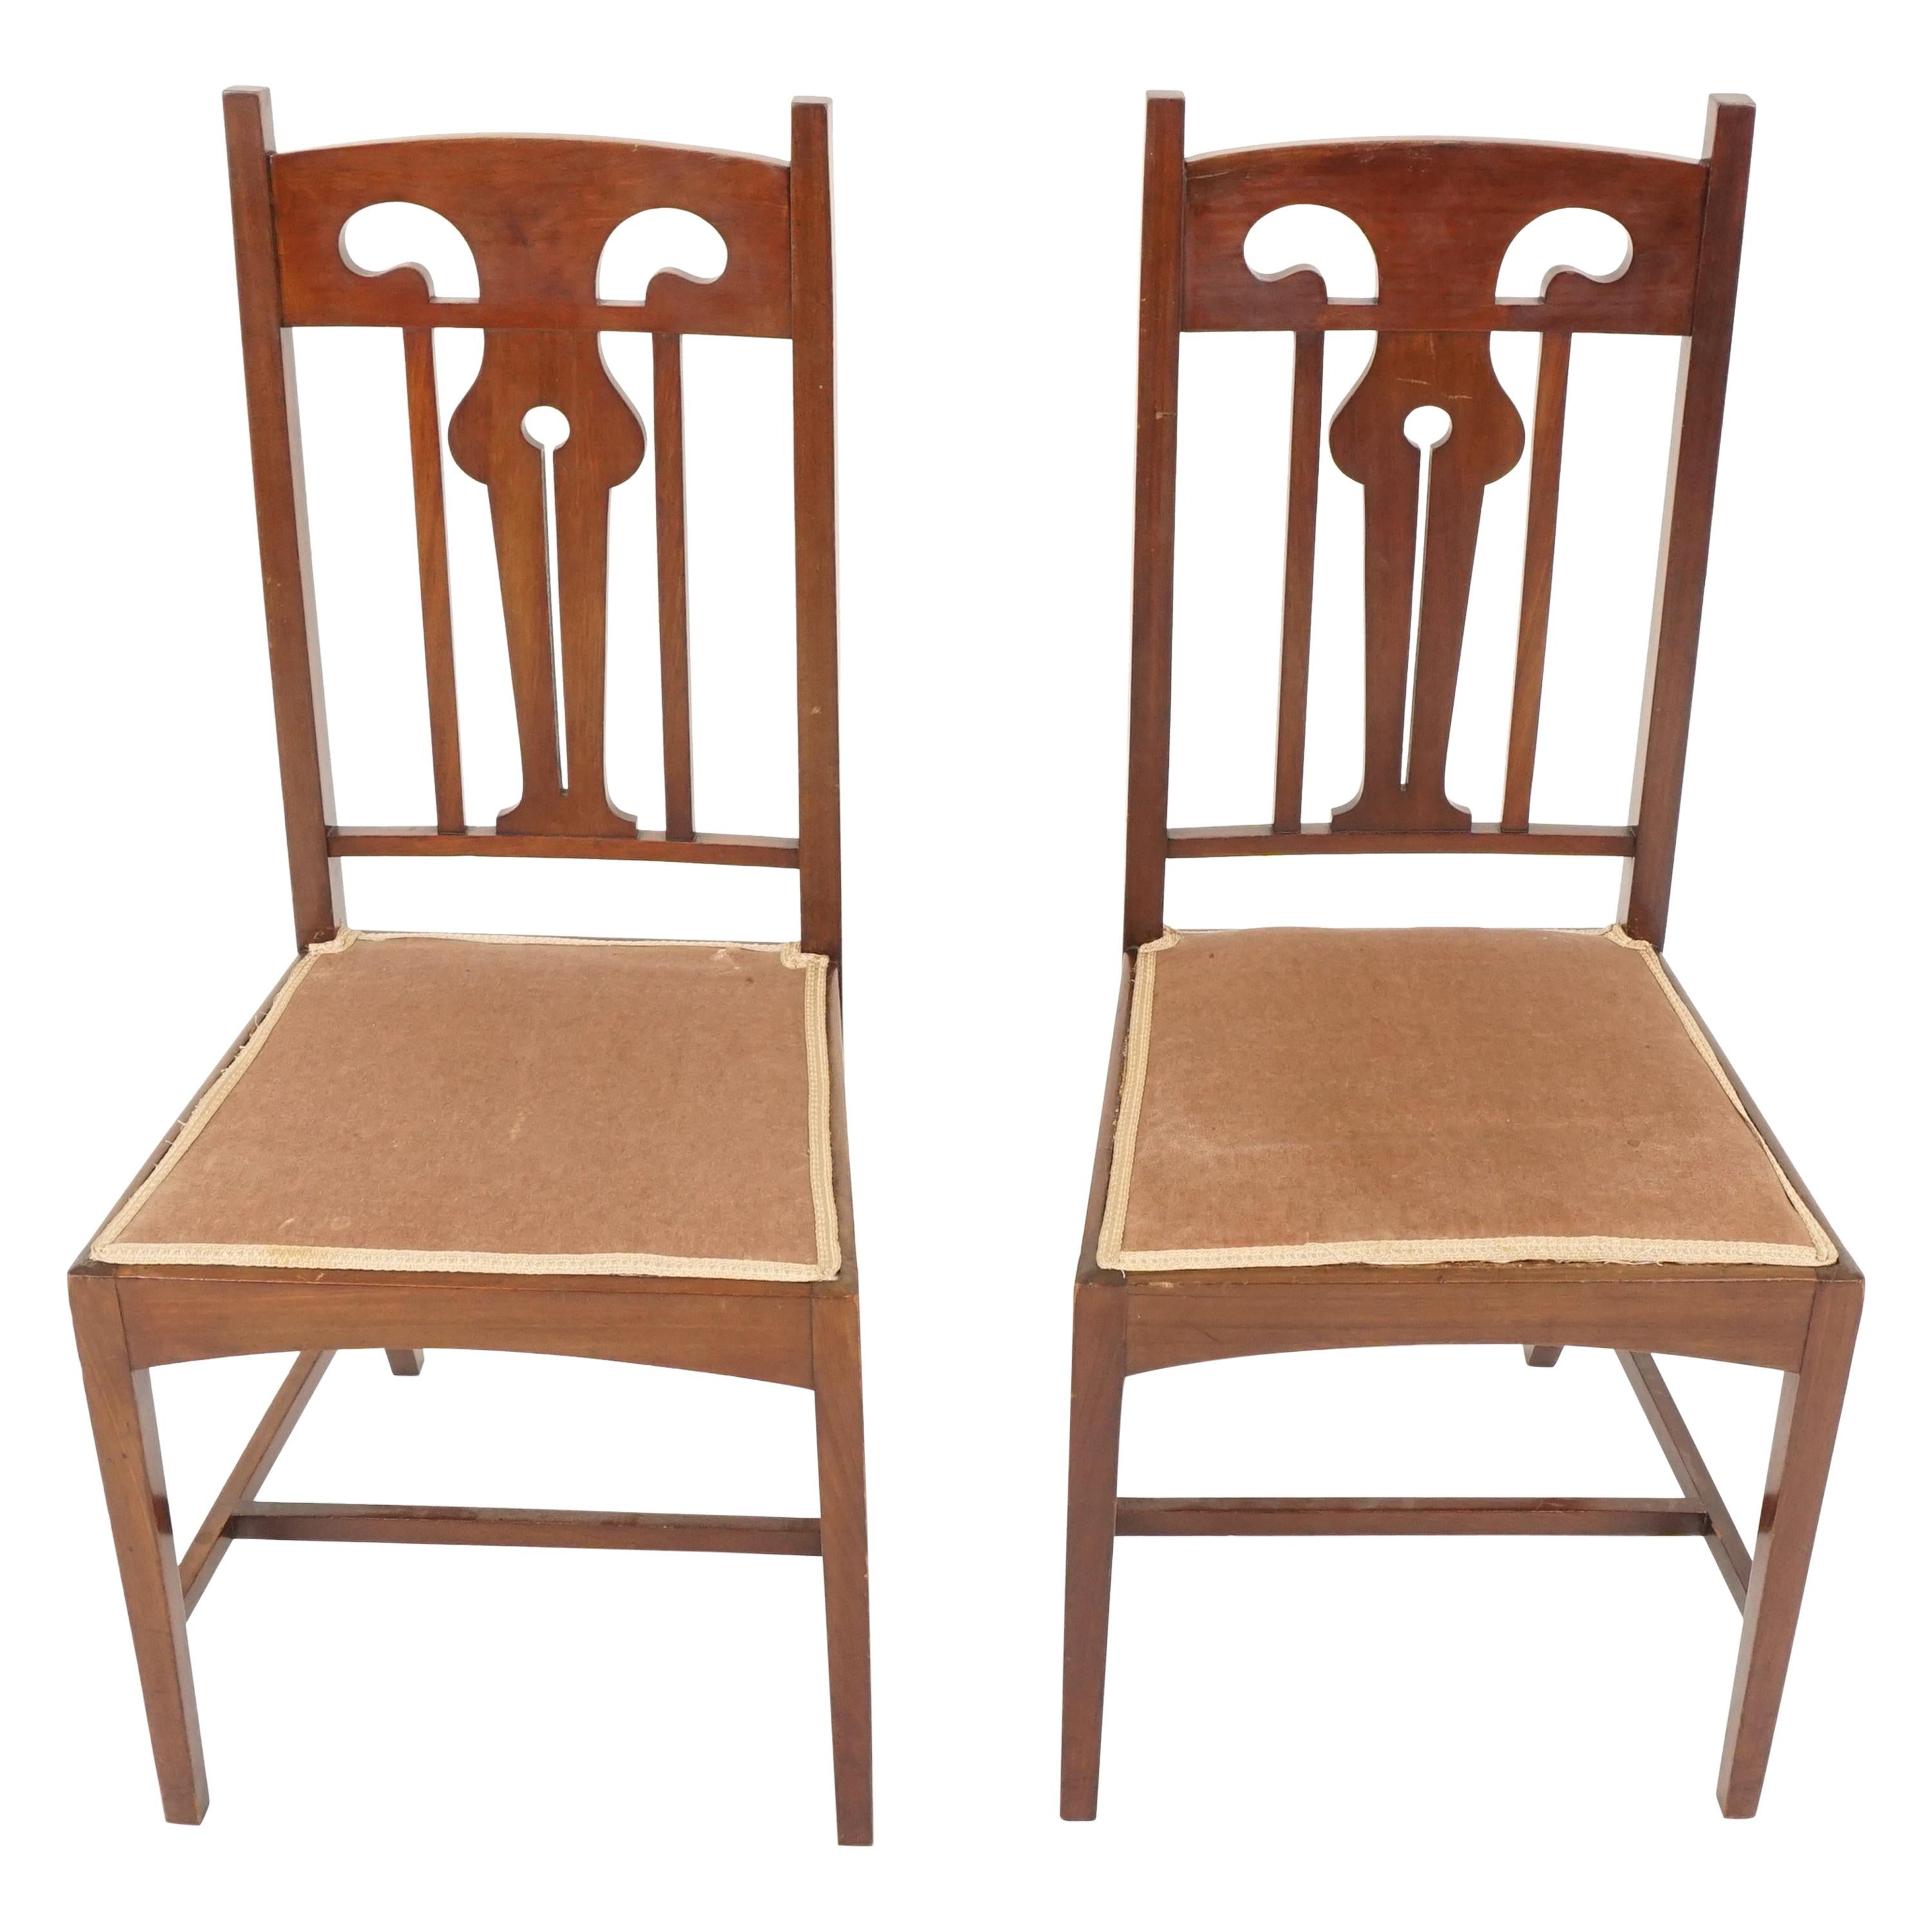 Antique Pair of Art Nouveau Upholstered Bedroom Chairs, Scotland 1910, B2258